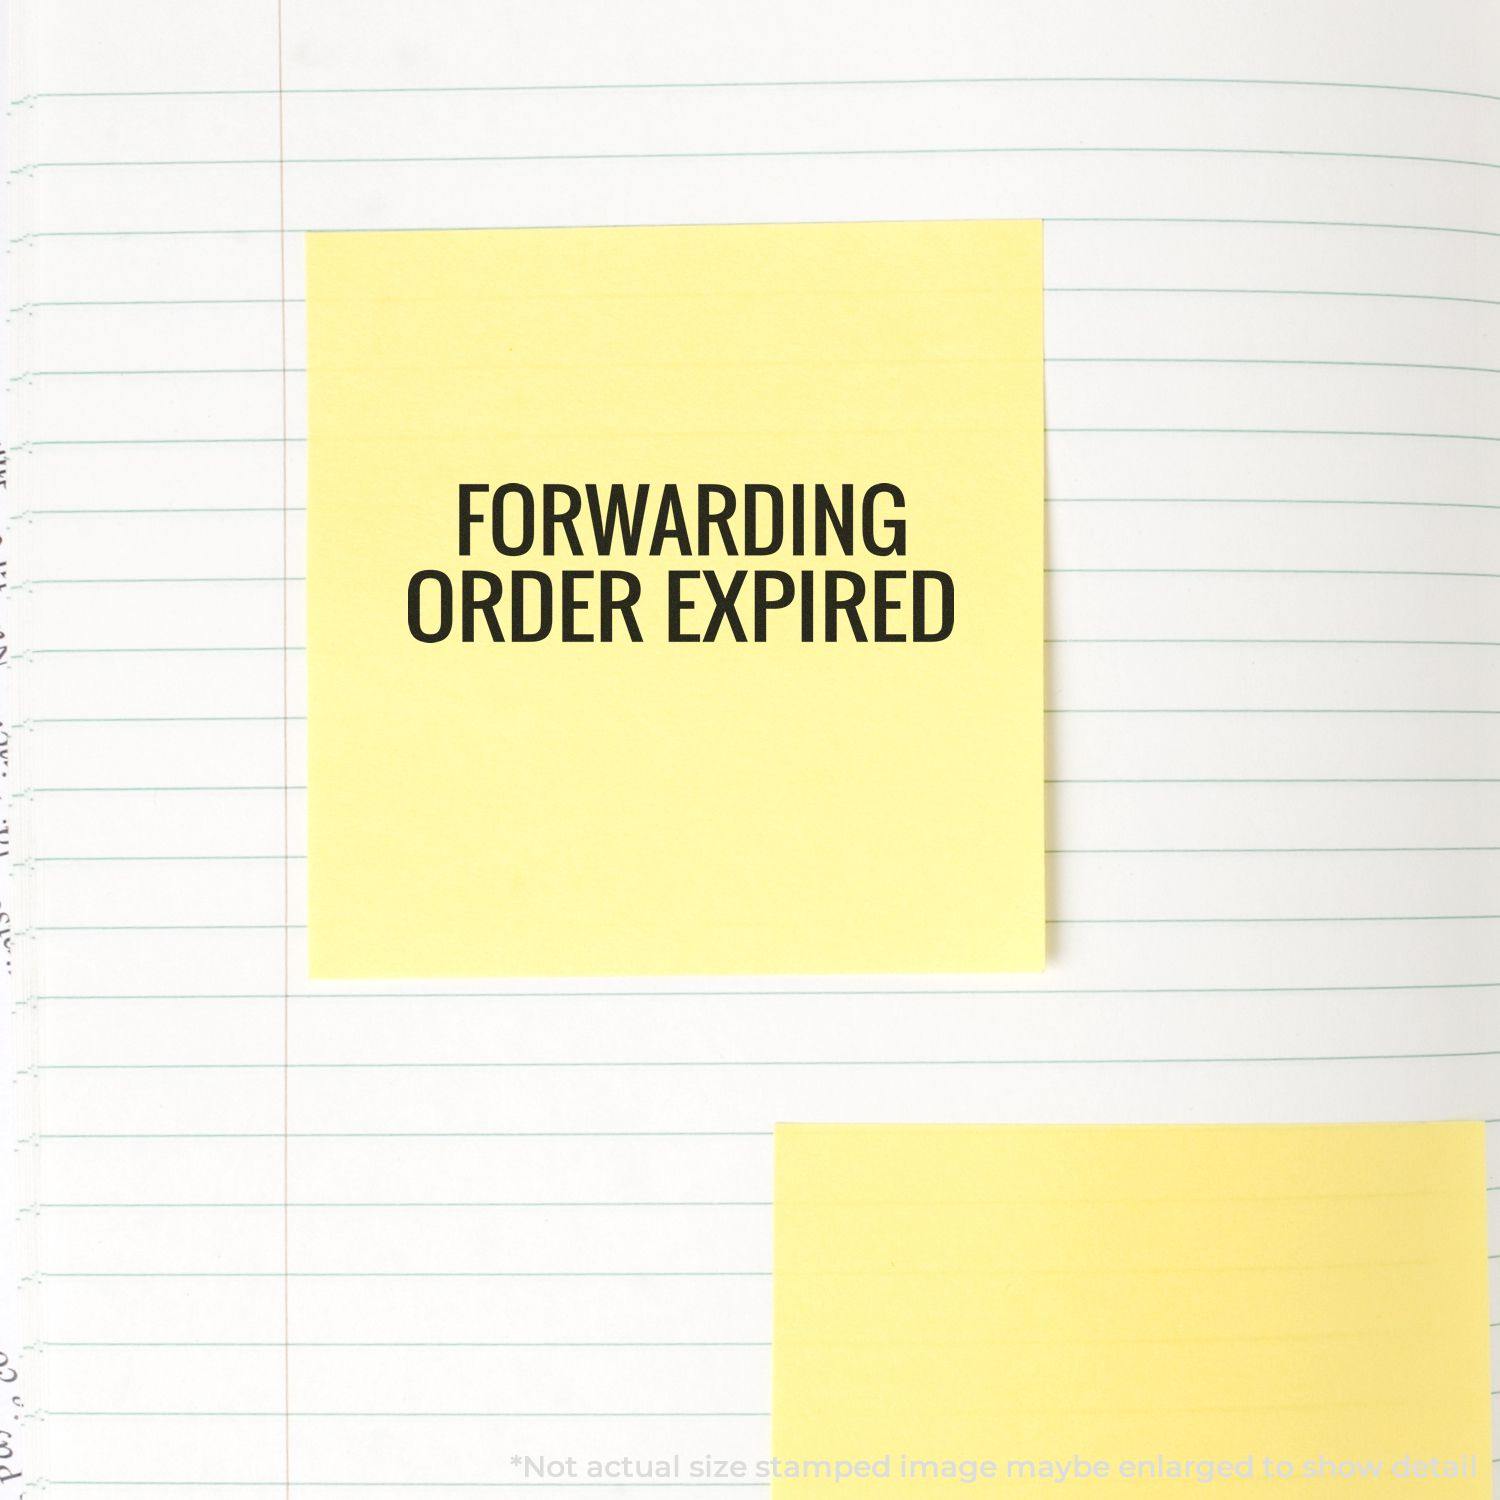 A self-inking stamp with a stamped image showing how the text "FORWARDING ORDER EXPIRED" in a large font is displayed by it after stamping.